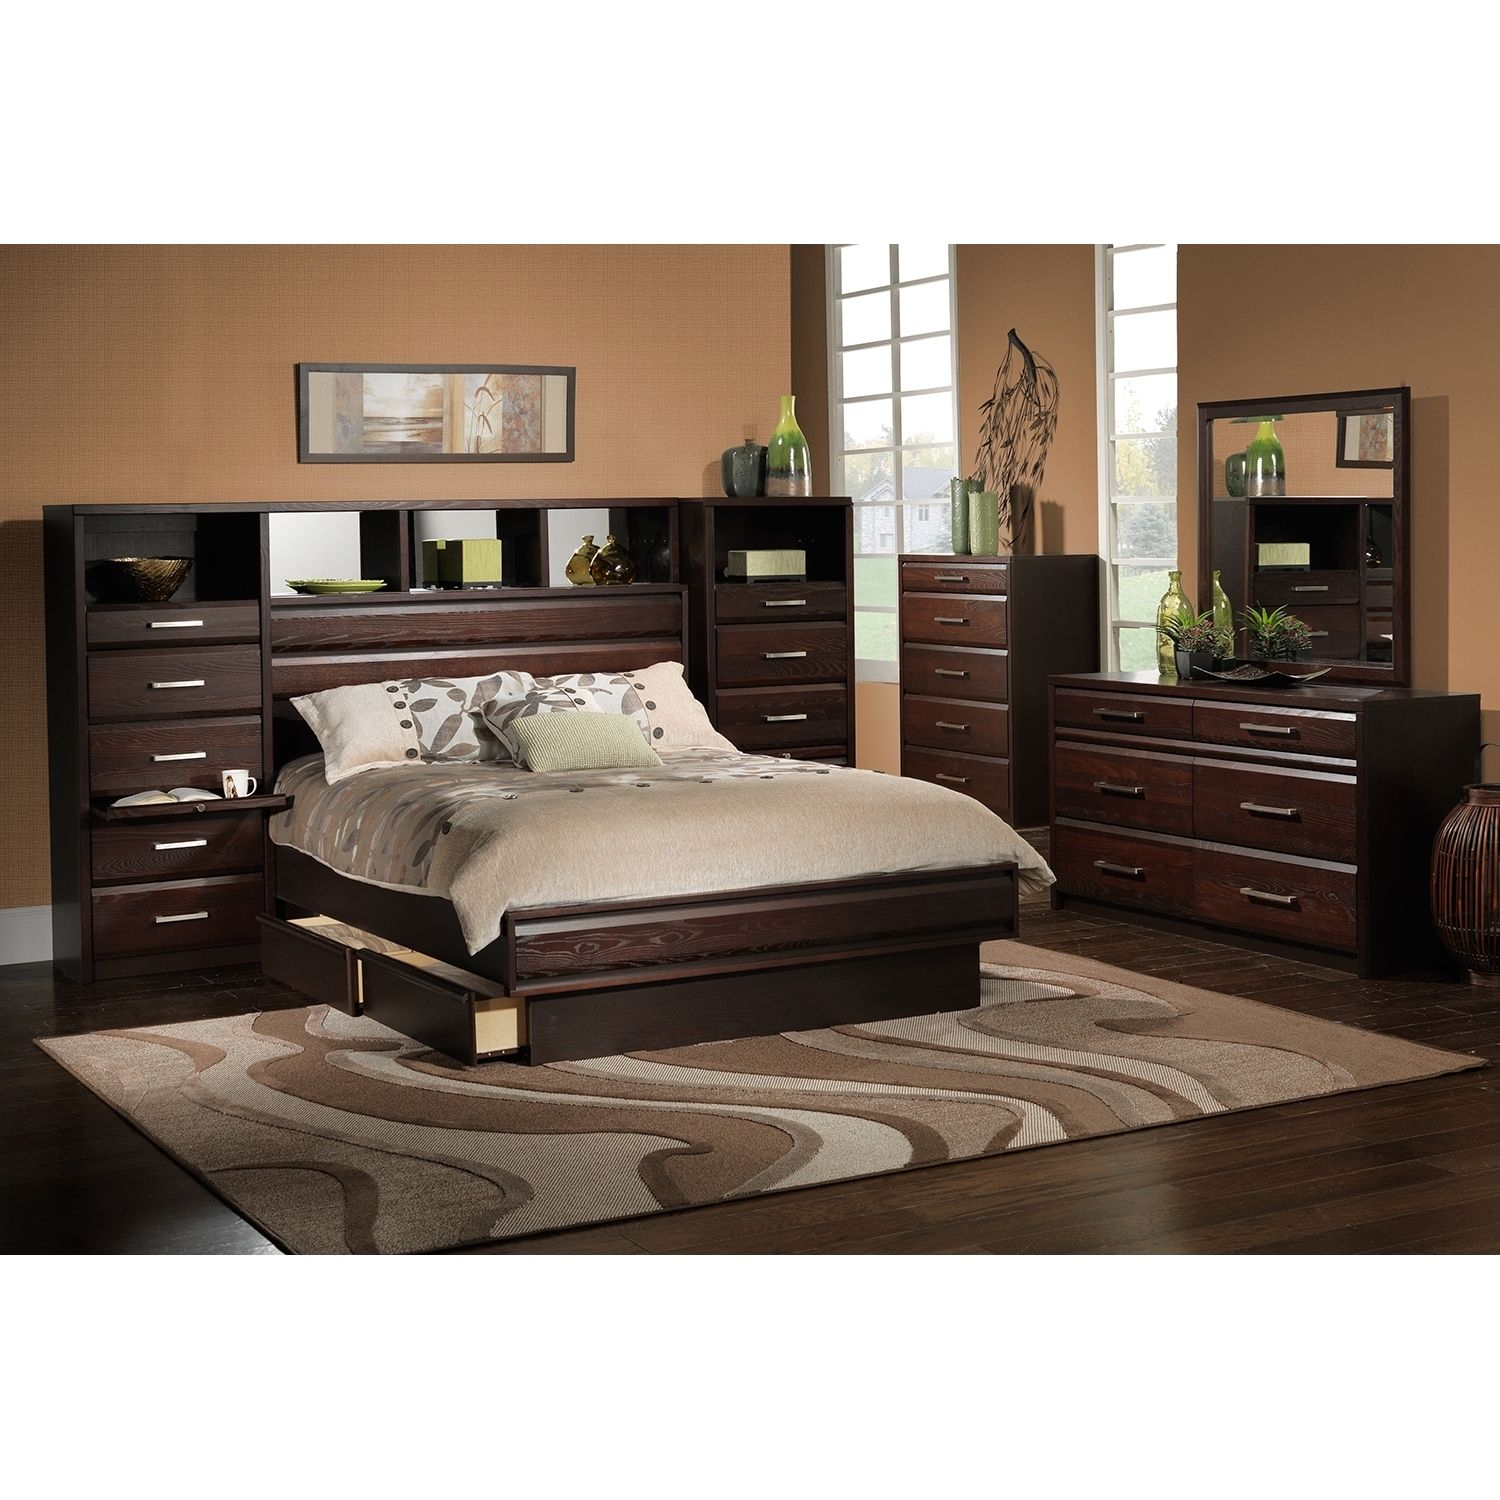 Tango Queen Wall Bed With Regard To Wall Unit Bedroom Furniture regarding dimensions 1500 X 1500